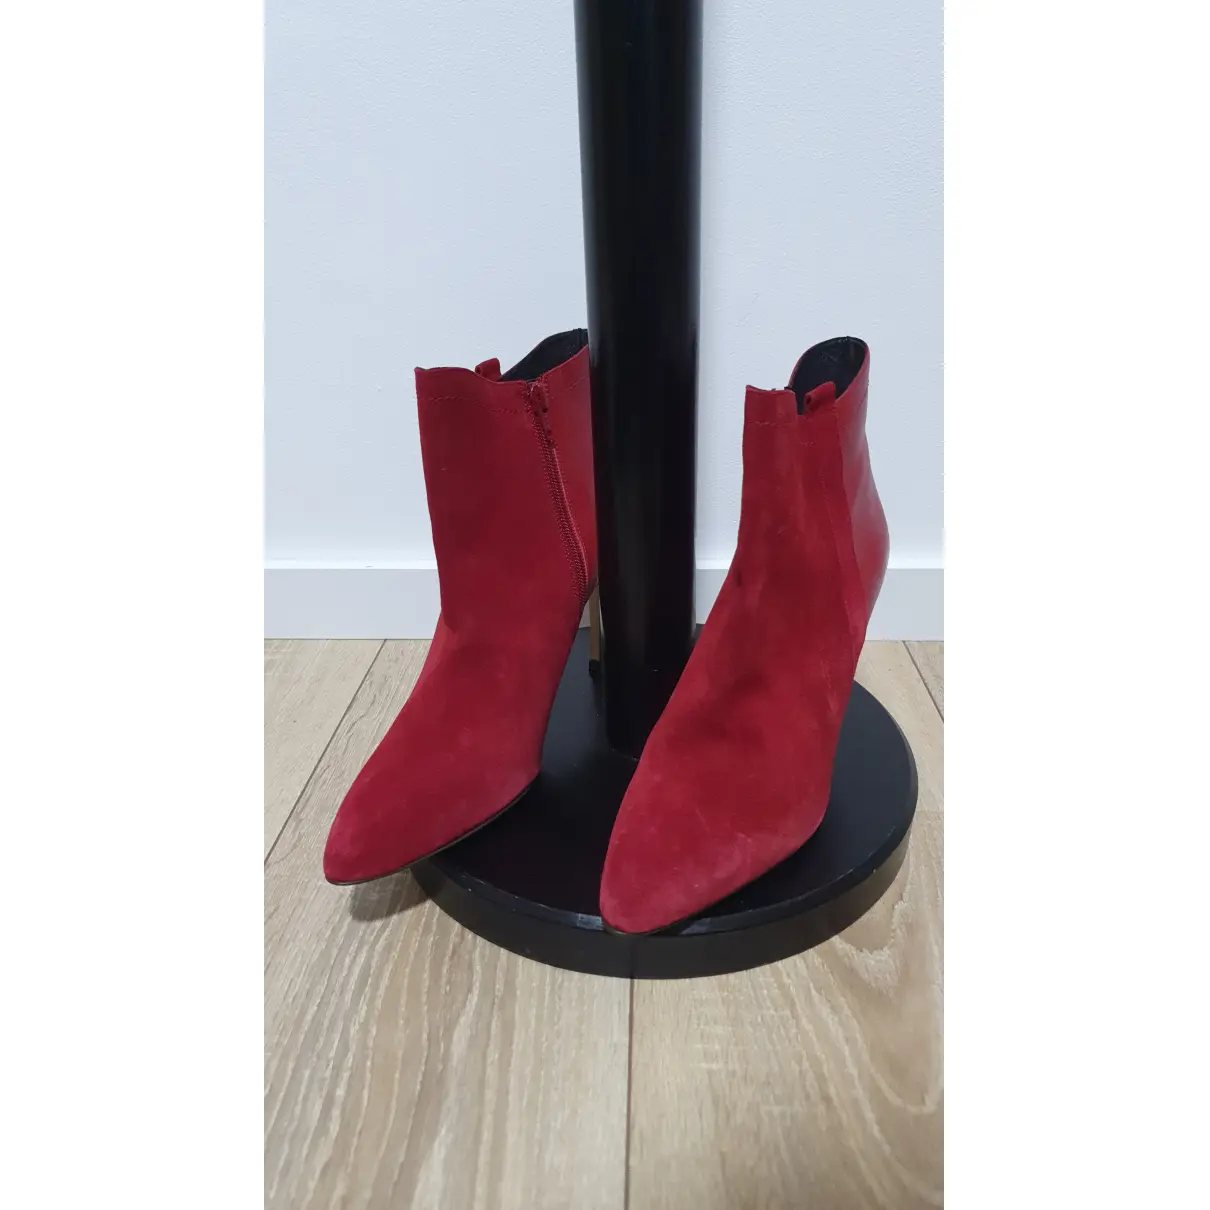 Buy SAN MARINA Leather ankle boots online